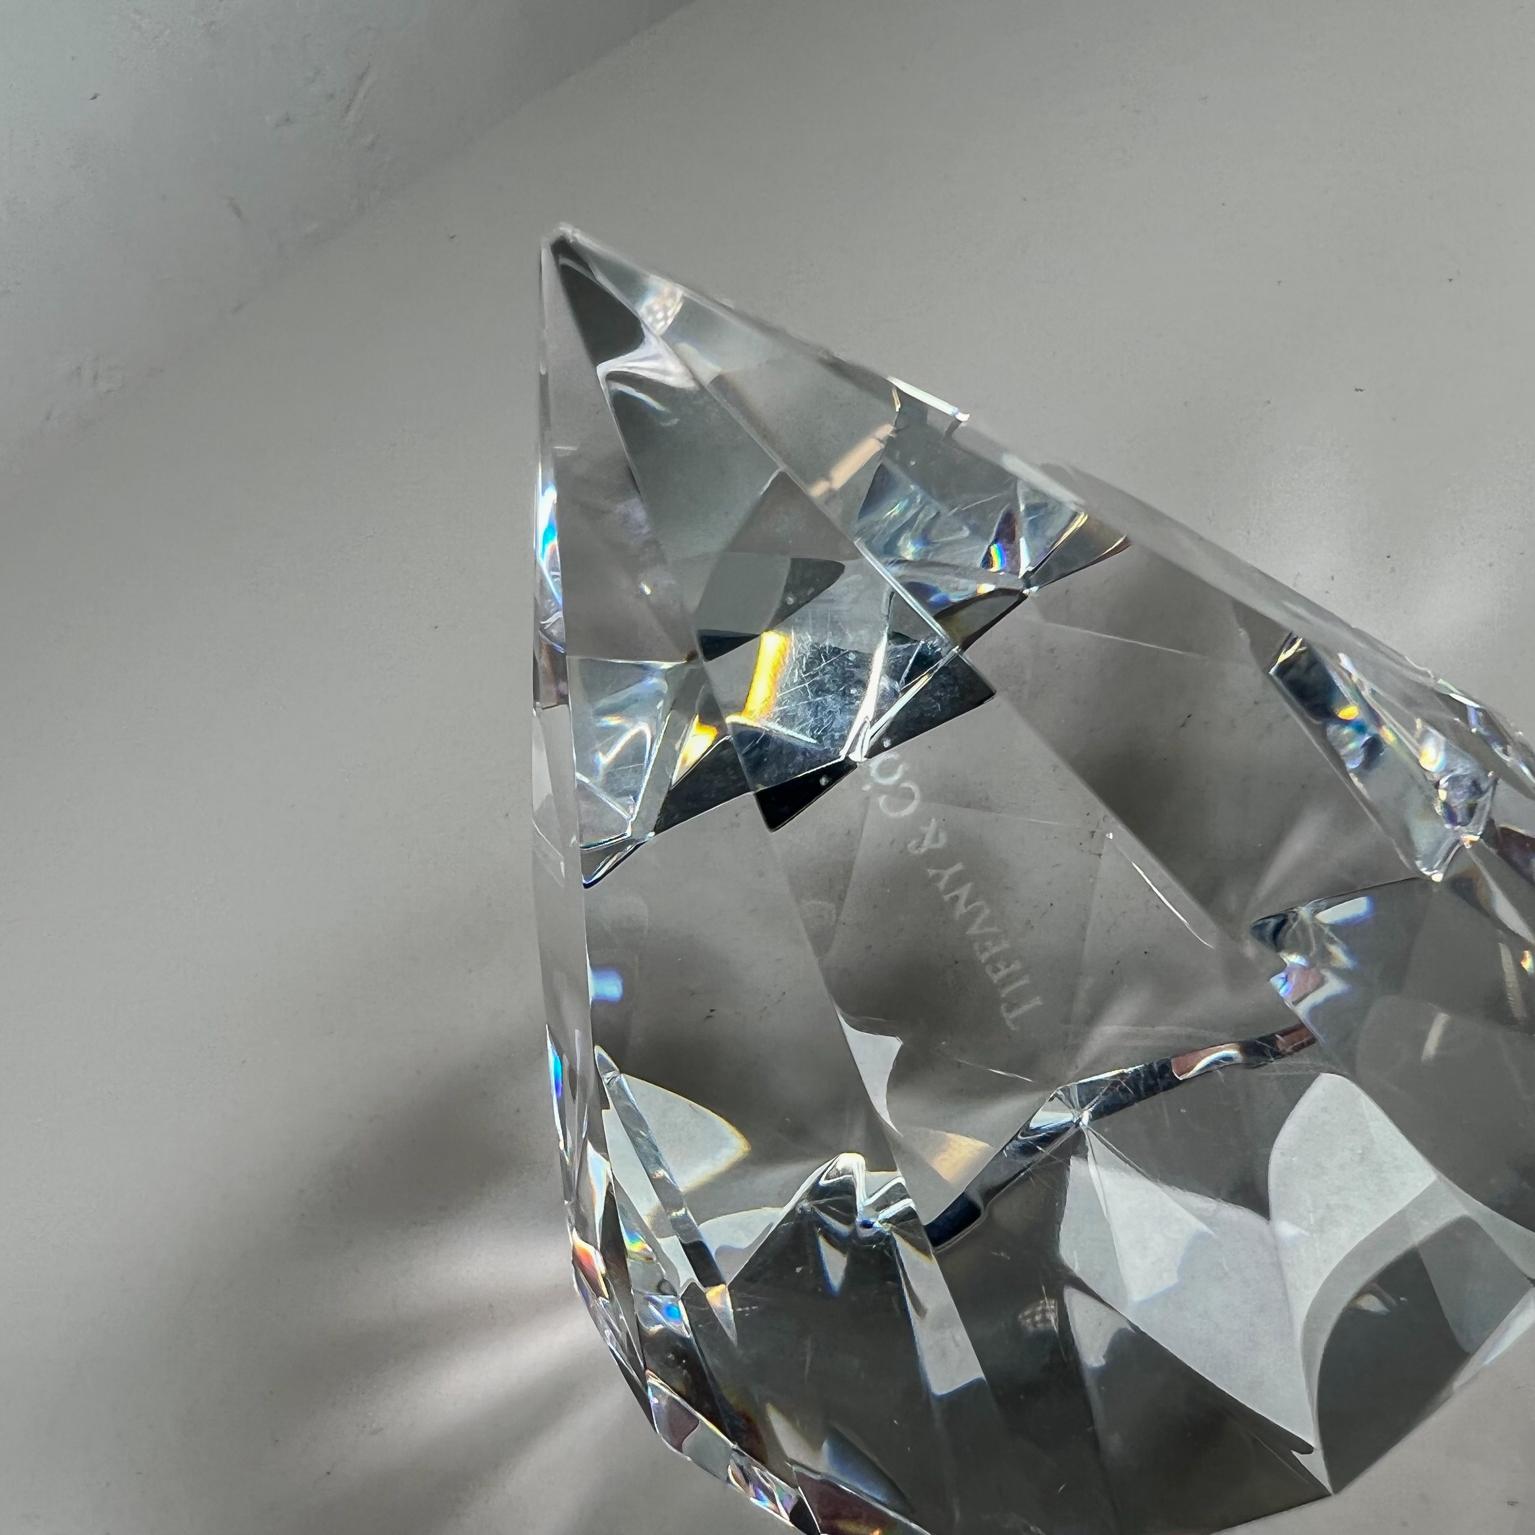 Late 20th Century Tiffany & Co Crystal Art Glass Modern Faceted Diamond Paperweight Sculpture